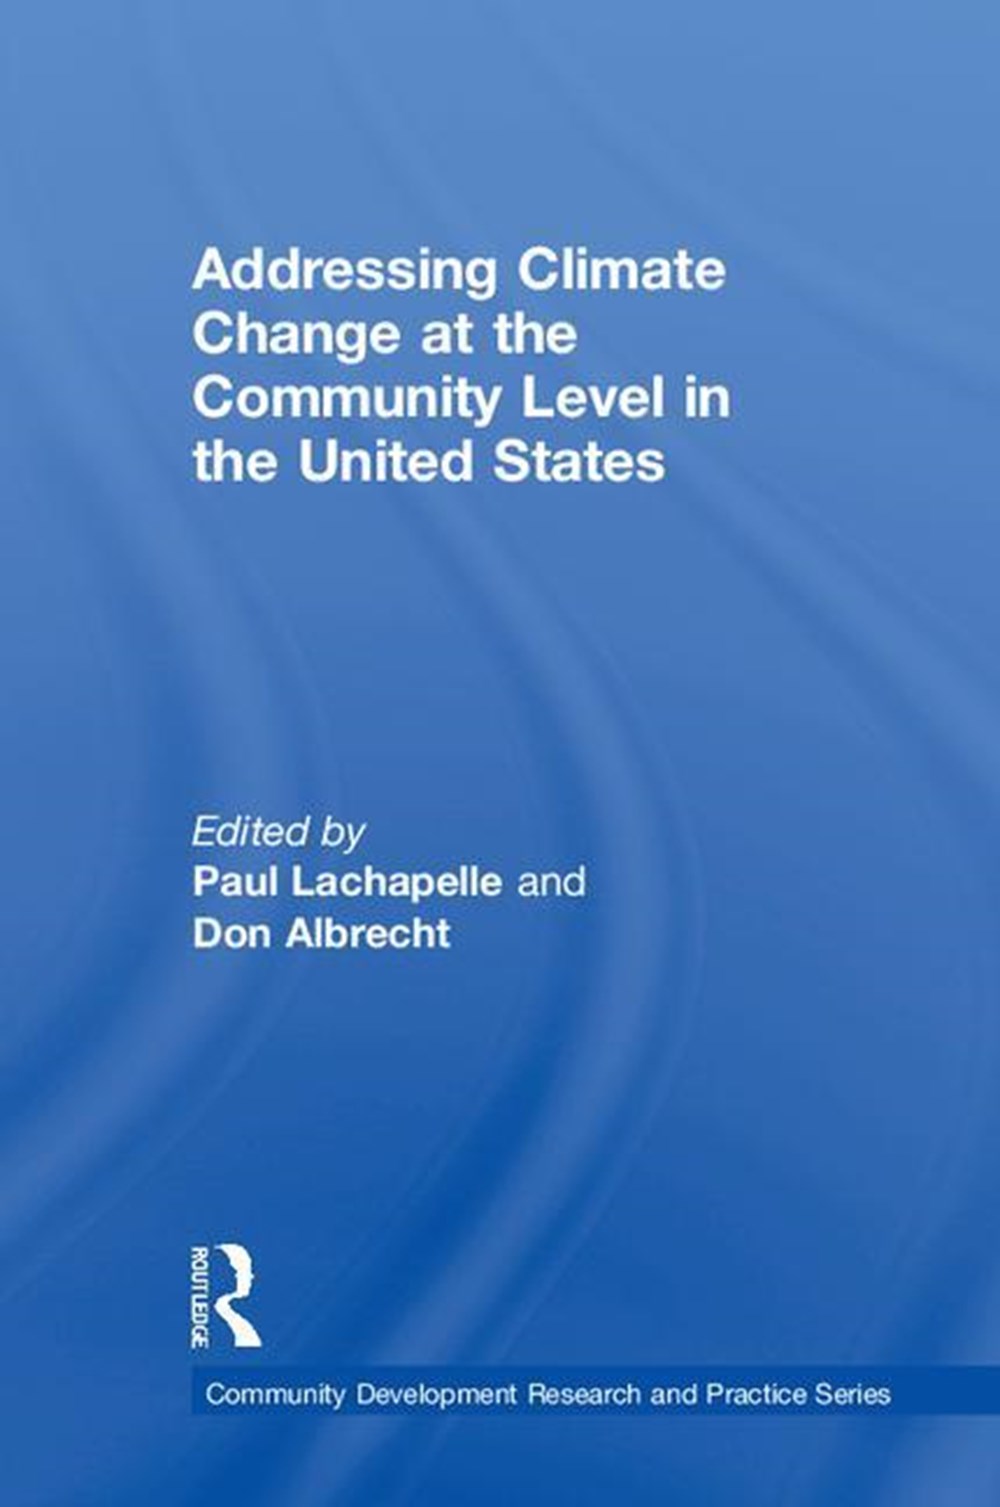 Addressing Climate Change at the Community Level in the United States